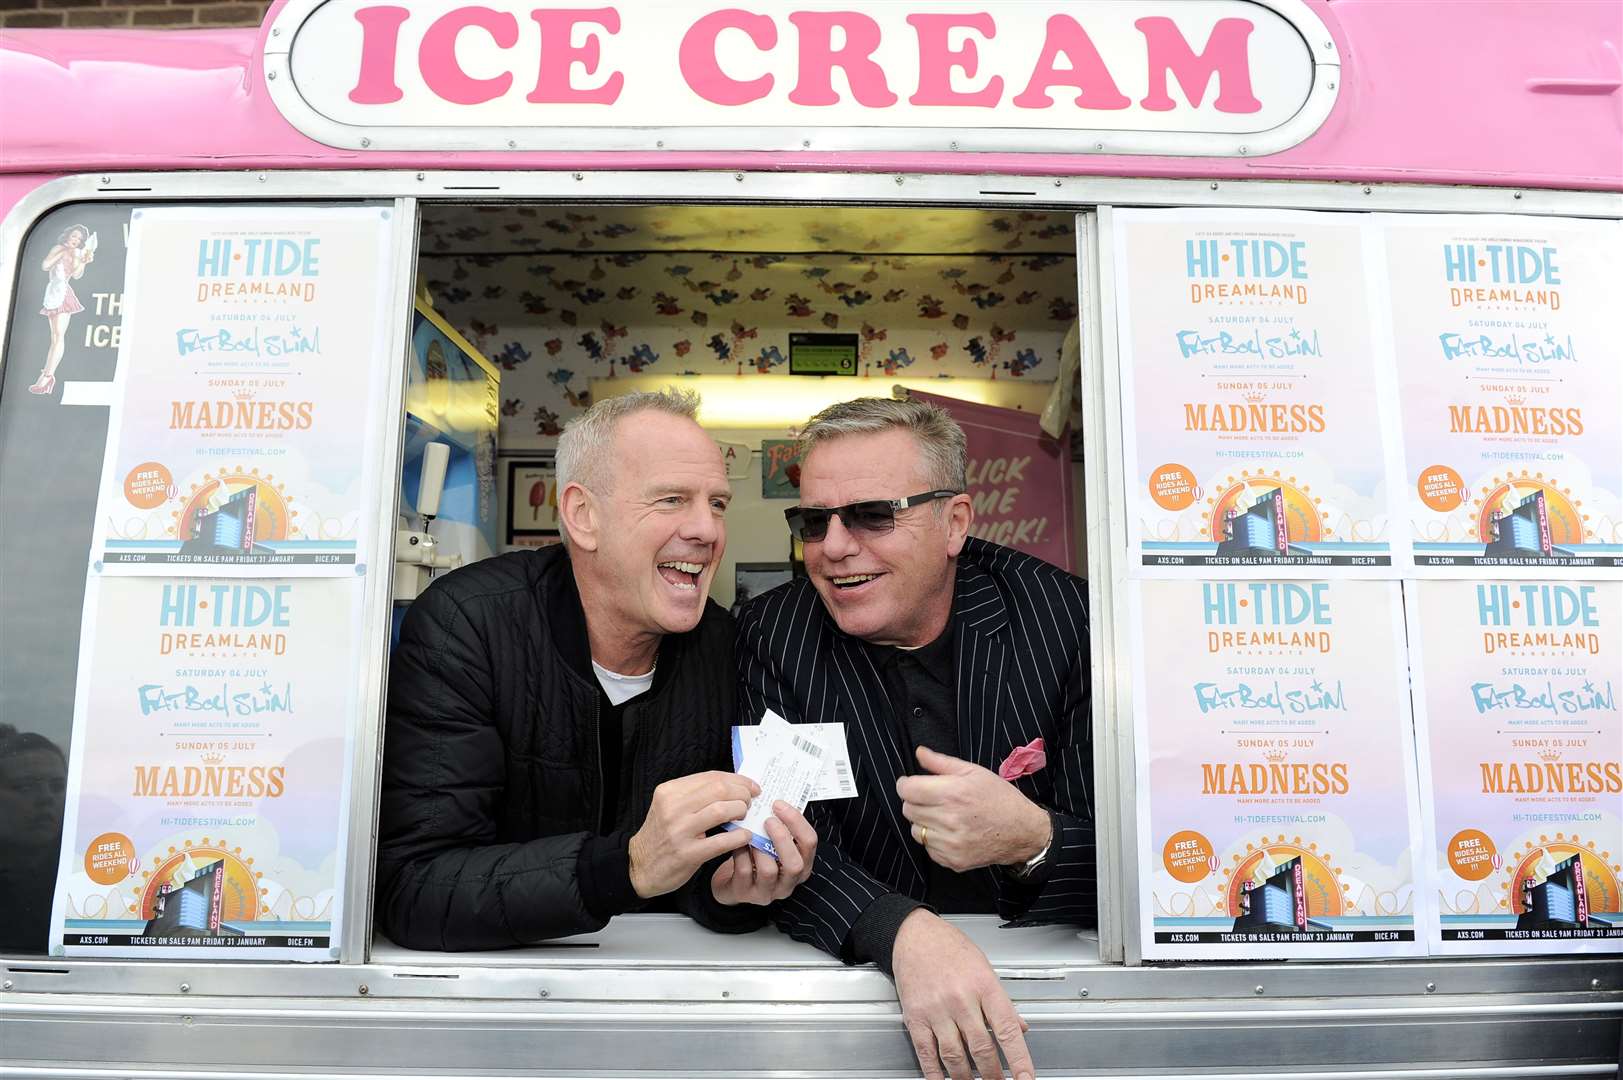 The Hi-Tide launch at Dreamland with Norman Cook (aka Fatboy Slim) and Madness front man Suggs Picture: Matt Kent